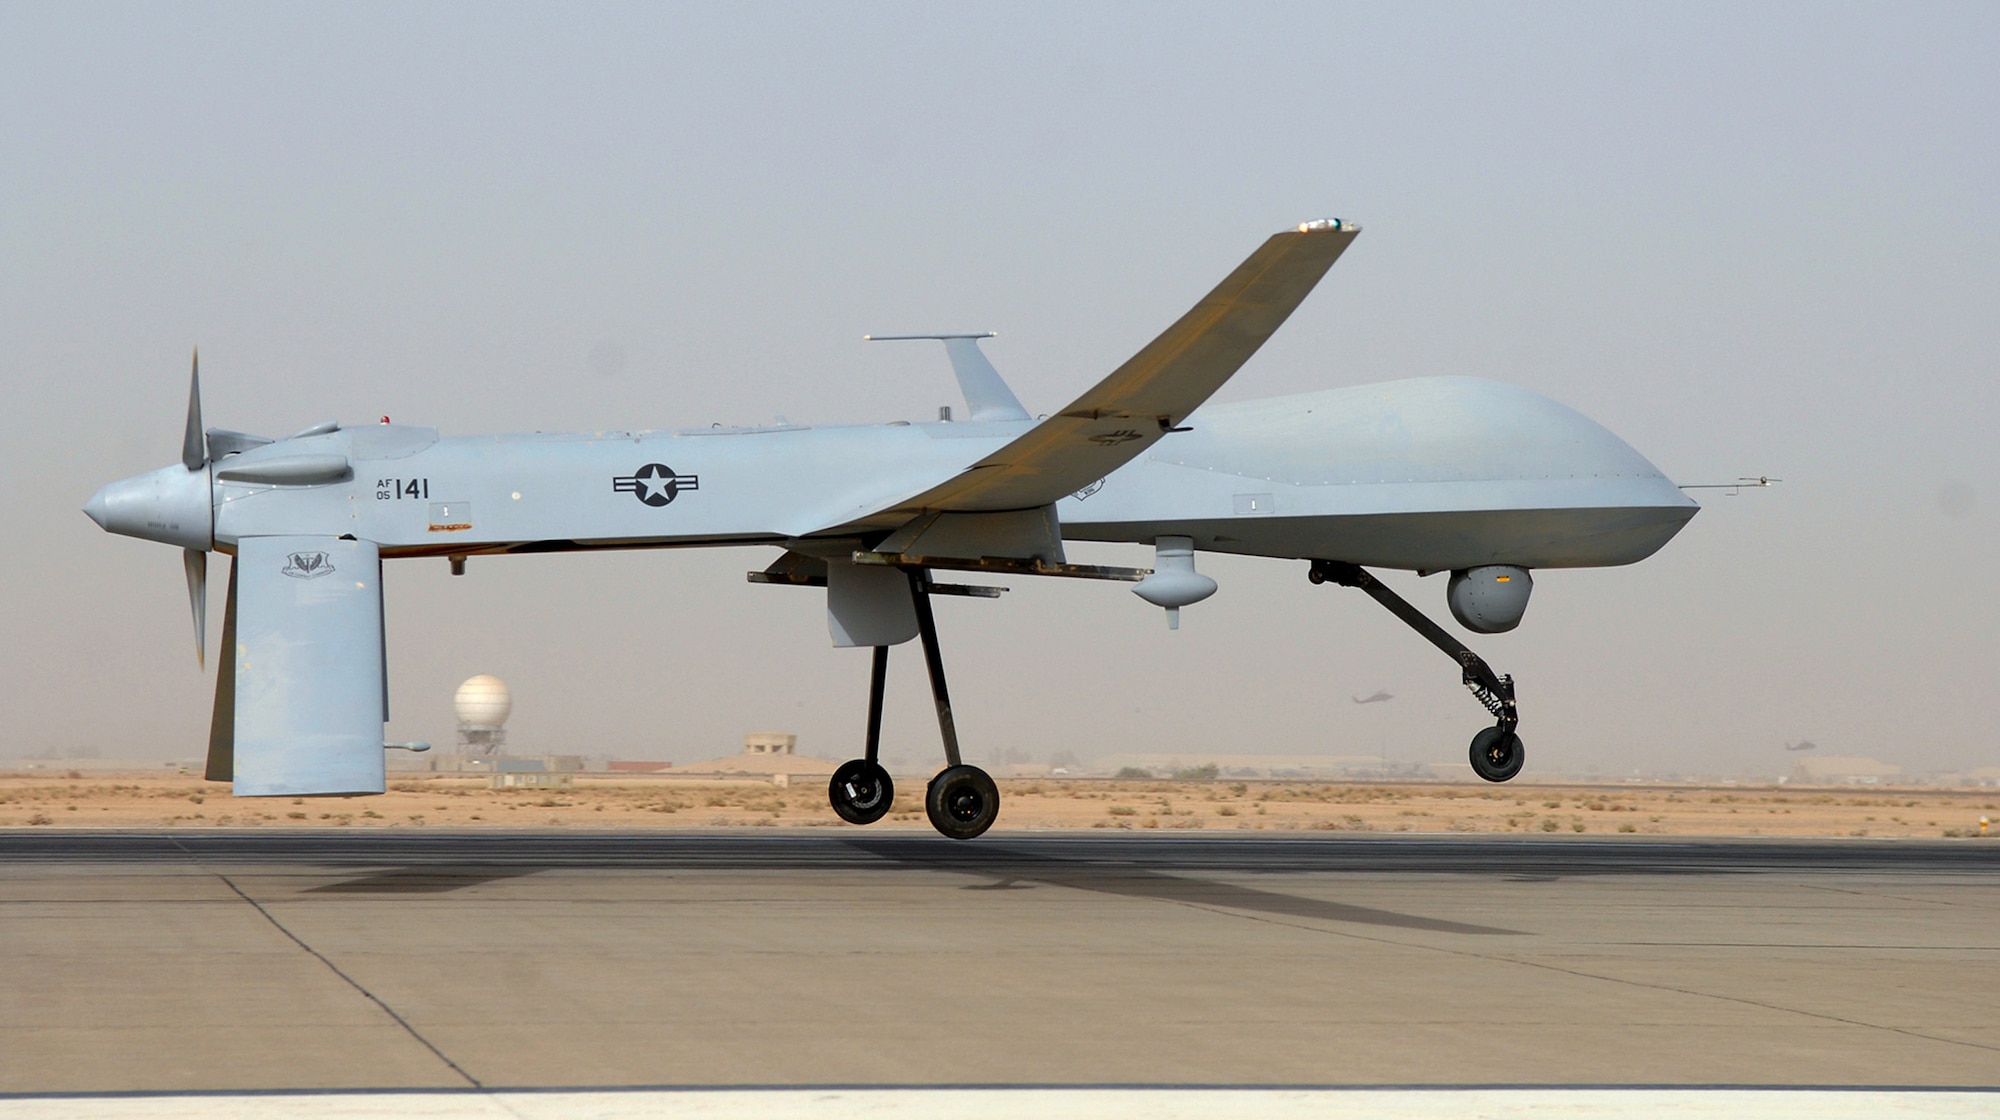 An MQ-1 Predator takes off in support of Operation Iraqi Freedom. The Predator carries the multi-spectral targeting system with inherent AGM-114 Hellfire missile targeting capability and integrates electro-optical, infrared, laser designator and laser illuminator into a single sensor package. (U.S. Air Force photo/Senior Airman Julianne Showalter)